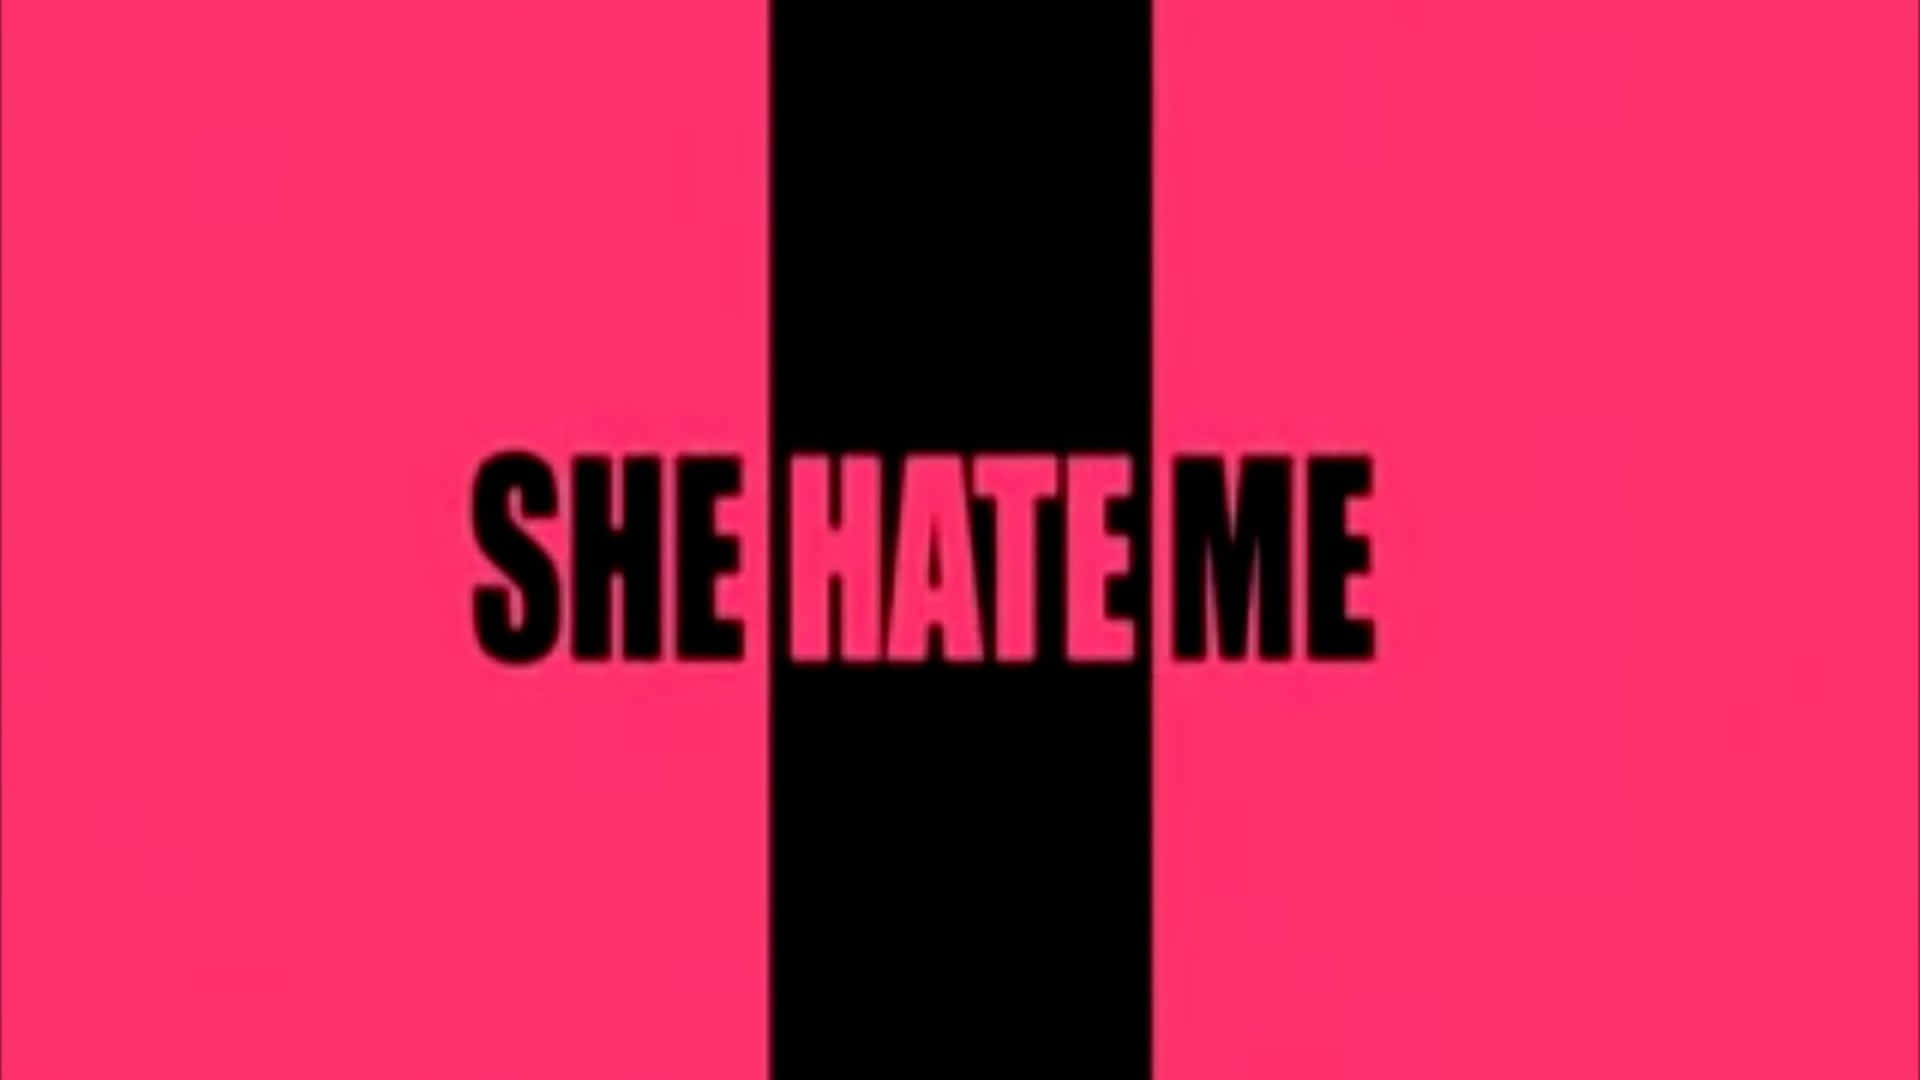 Download She Hate Me  A Black And Pink Cover Wallpaper  Wallpaperscom